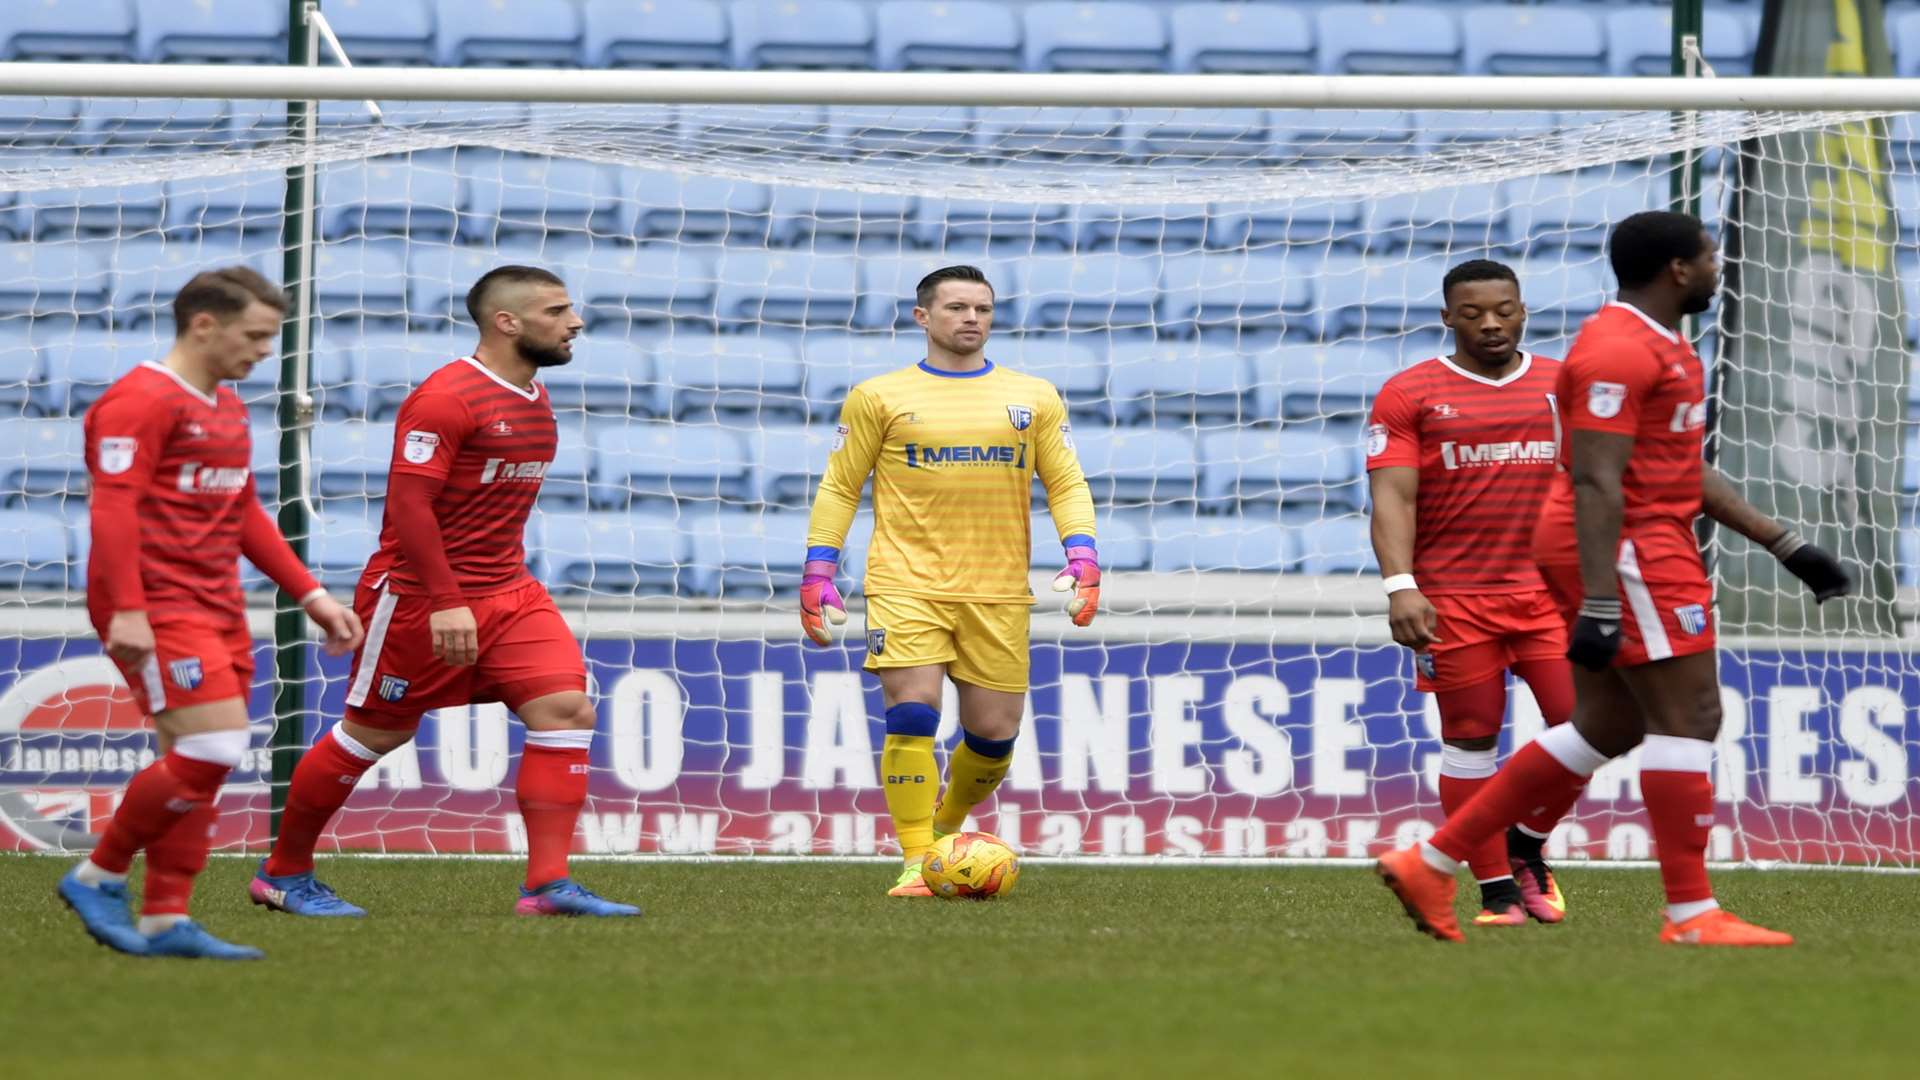 Gillingham go 2-0 down at Coventry Picture: Barry Goodwin